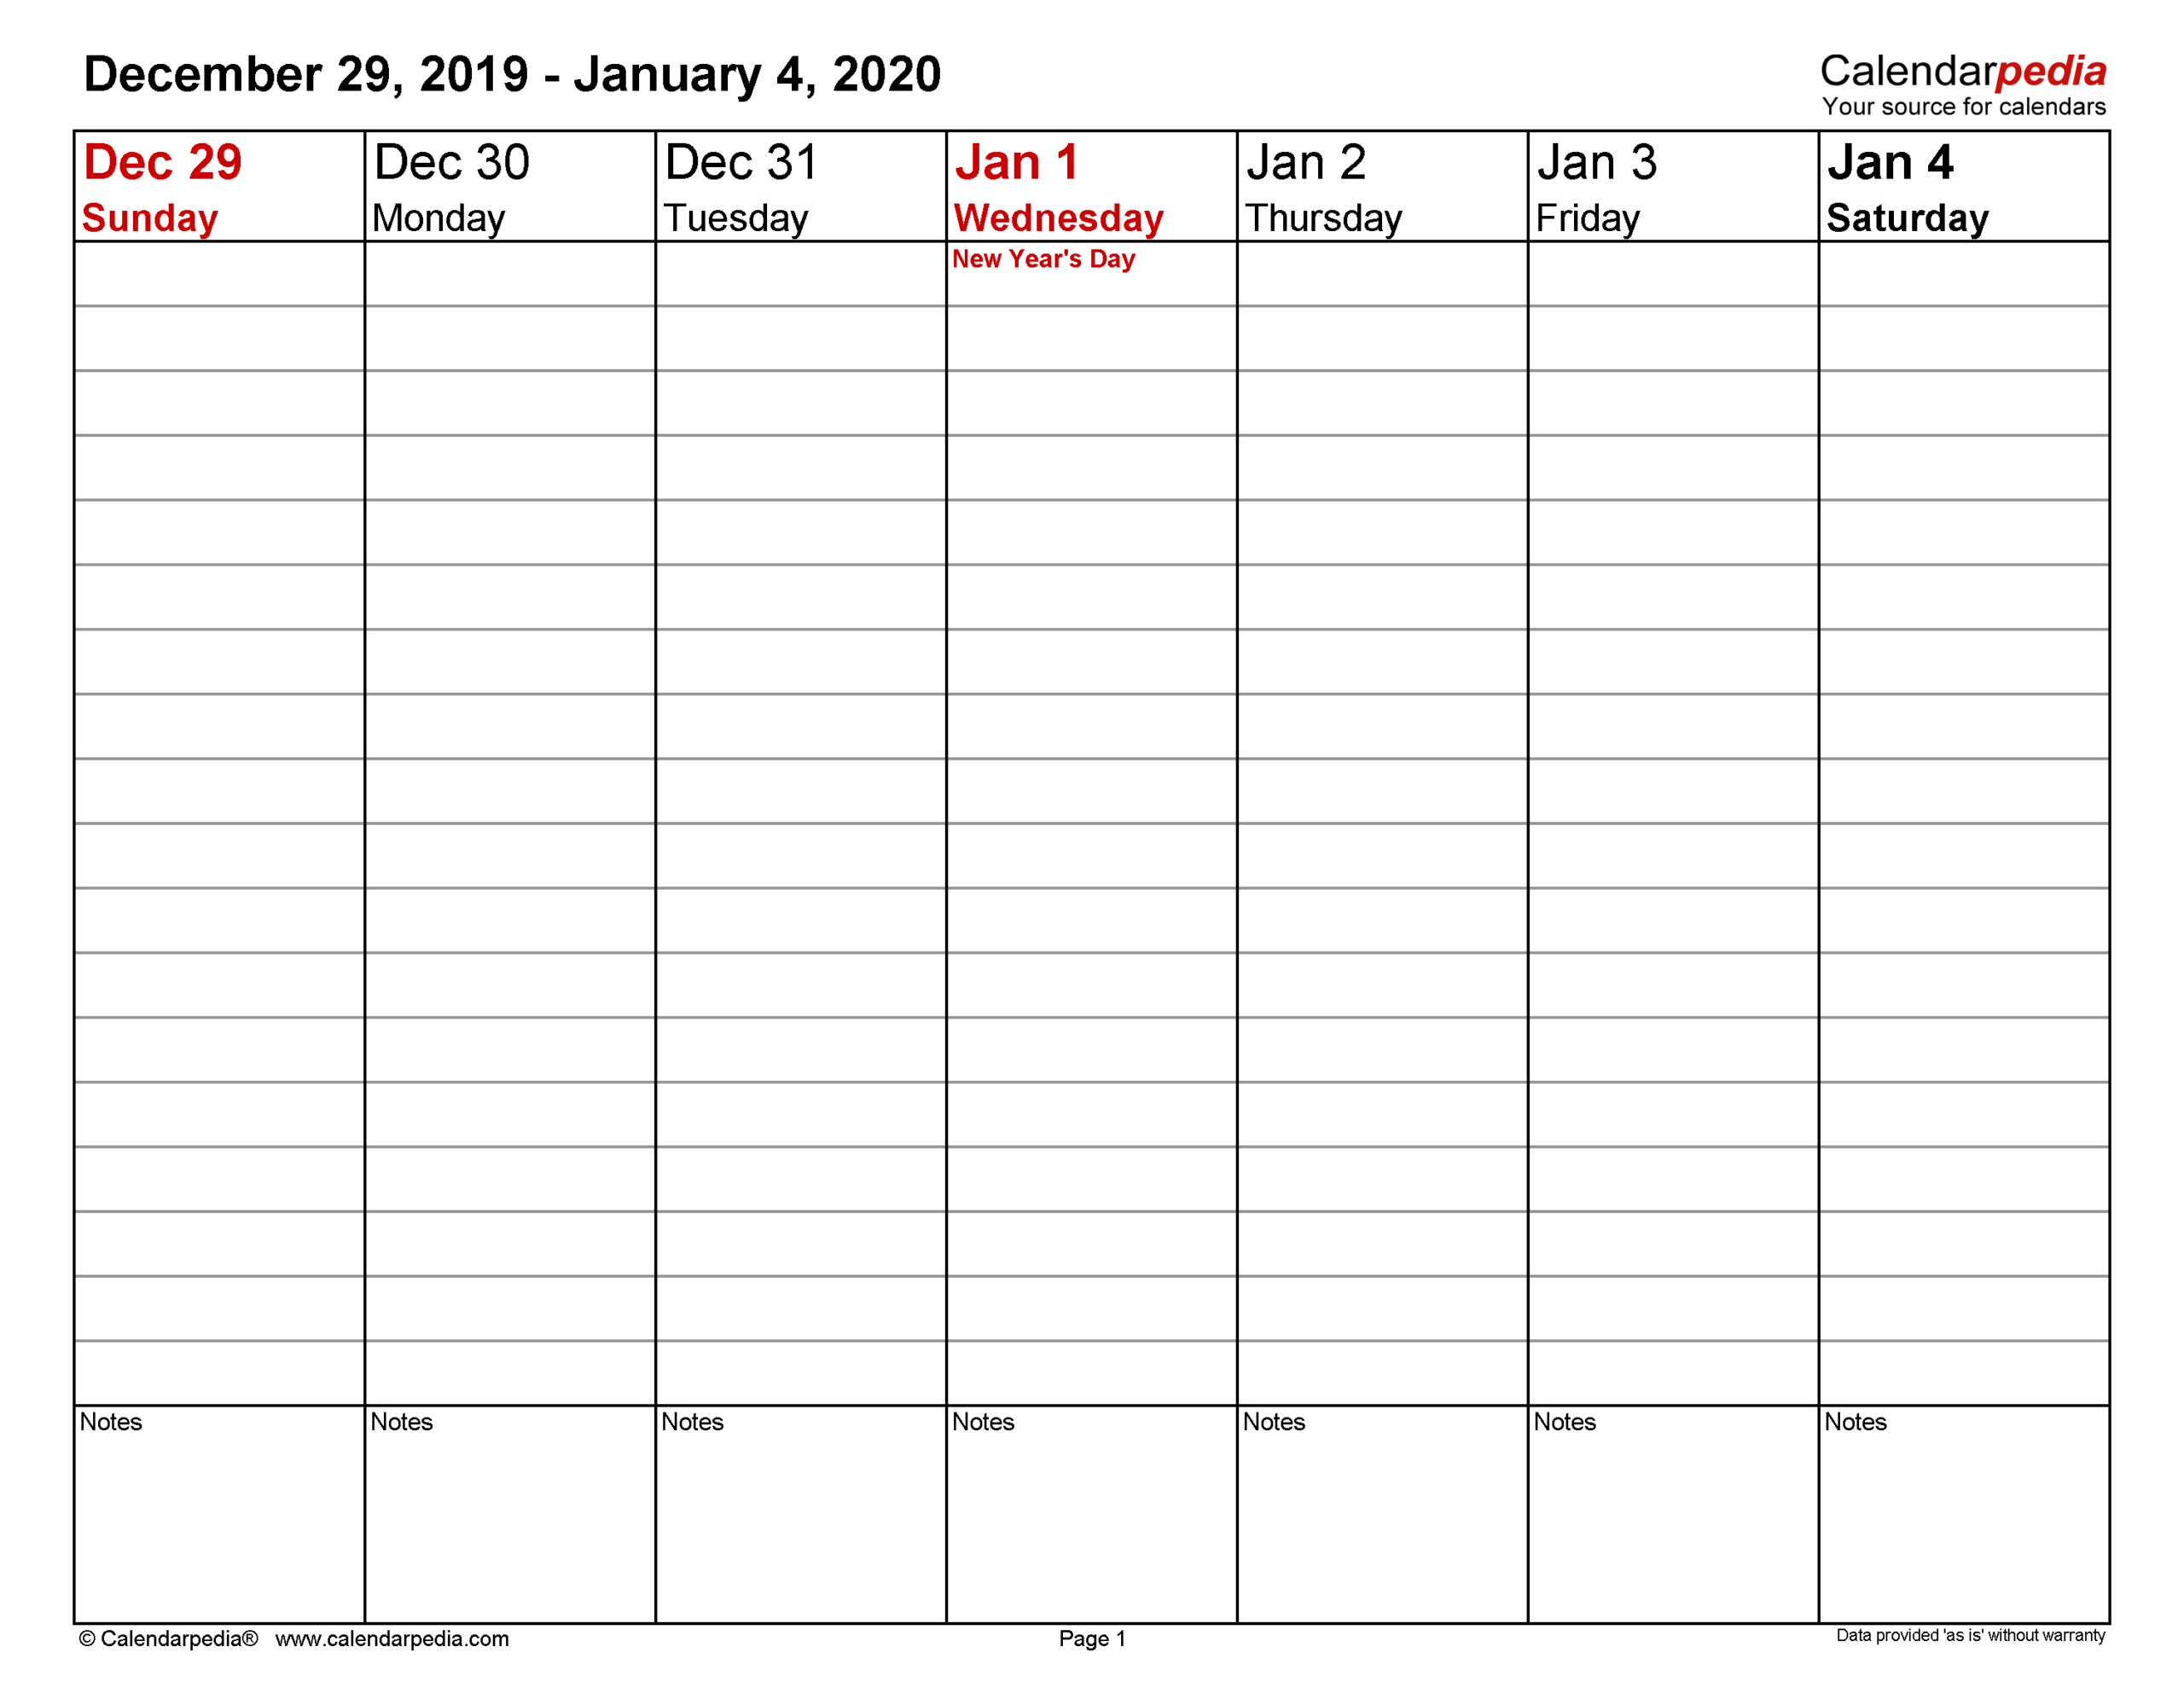 Weekly Calendars 2020 For Word - 12 Free Printable Templates-Hourly Printable Schedule Calendars 2021